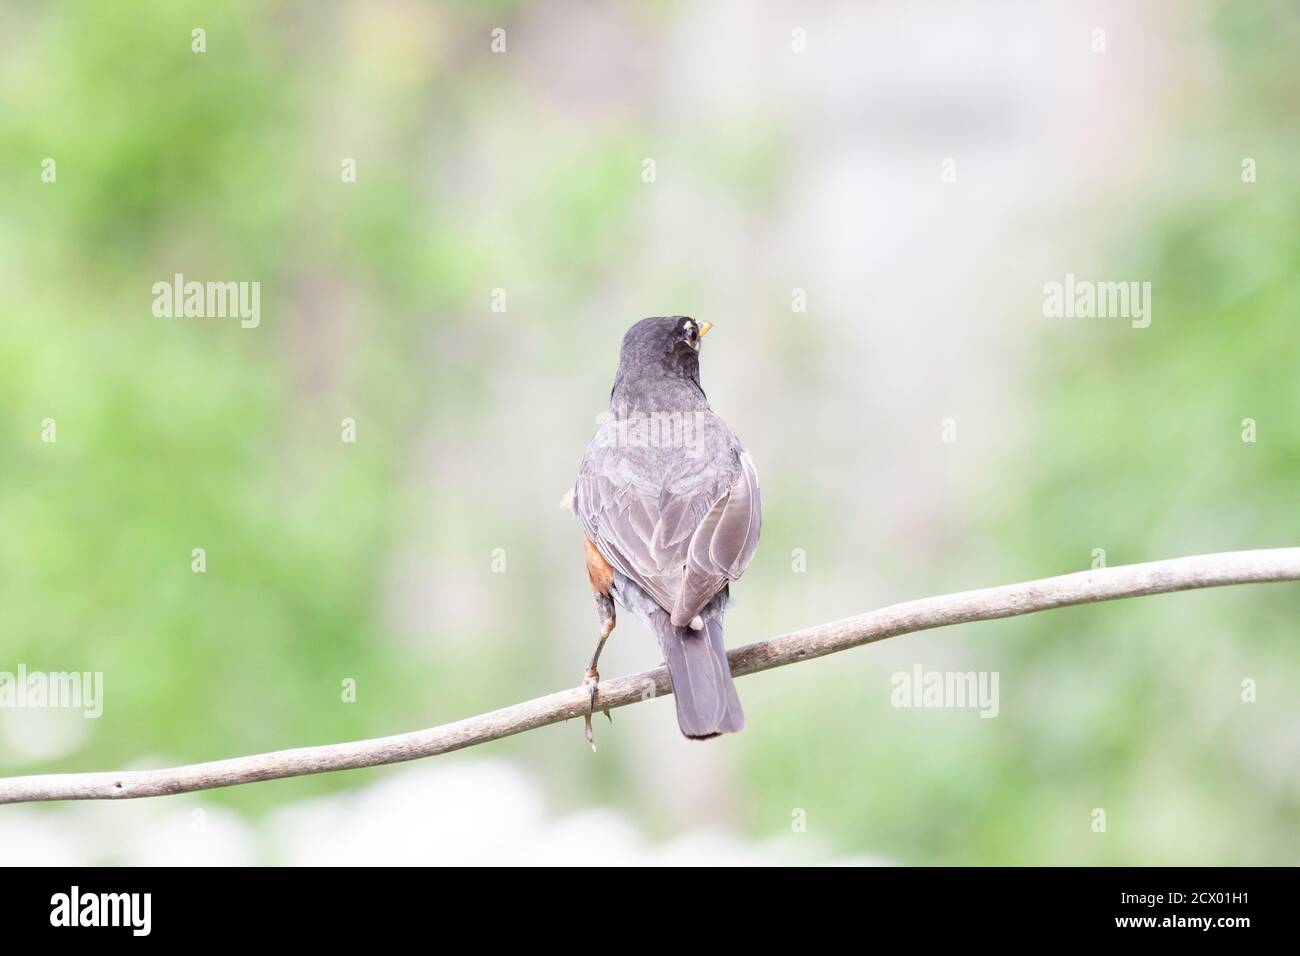 The backside of an American robin perched on a branch. Stock Photo